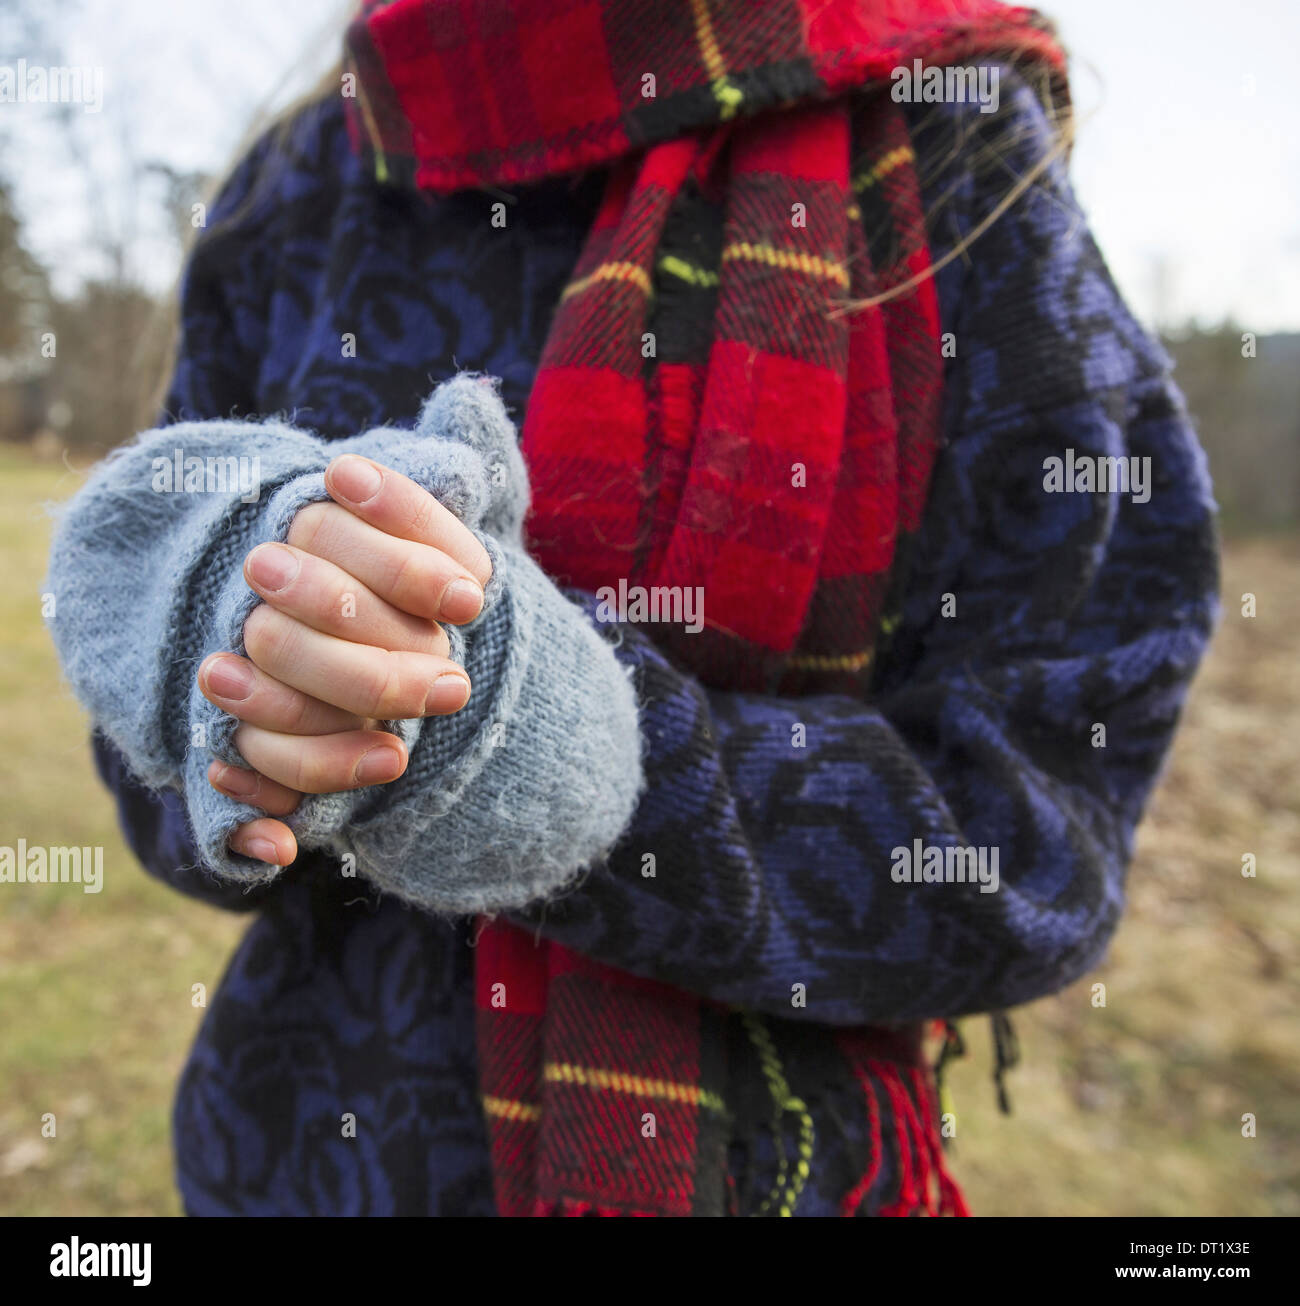 A woman in a tartan scarf and knitted woollen mitts keeping her hands warm in cold weather Stock Photo